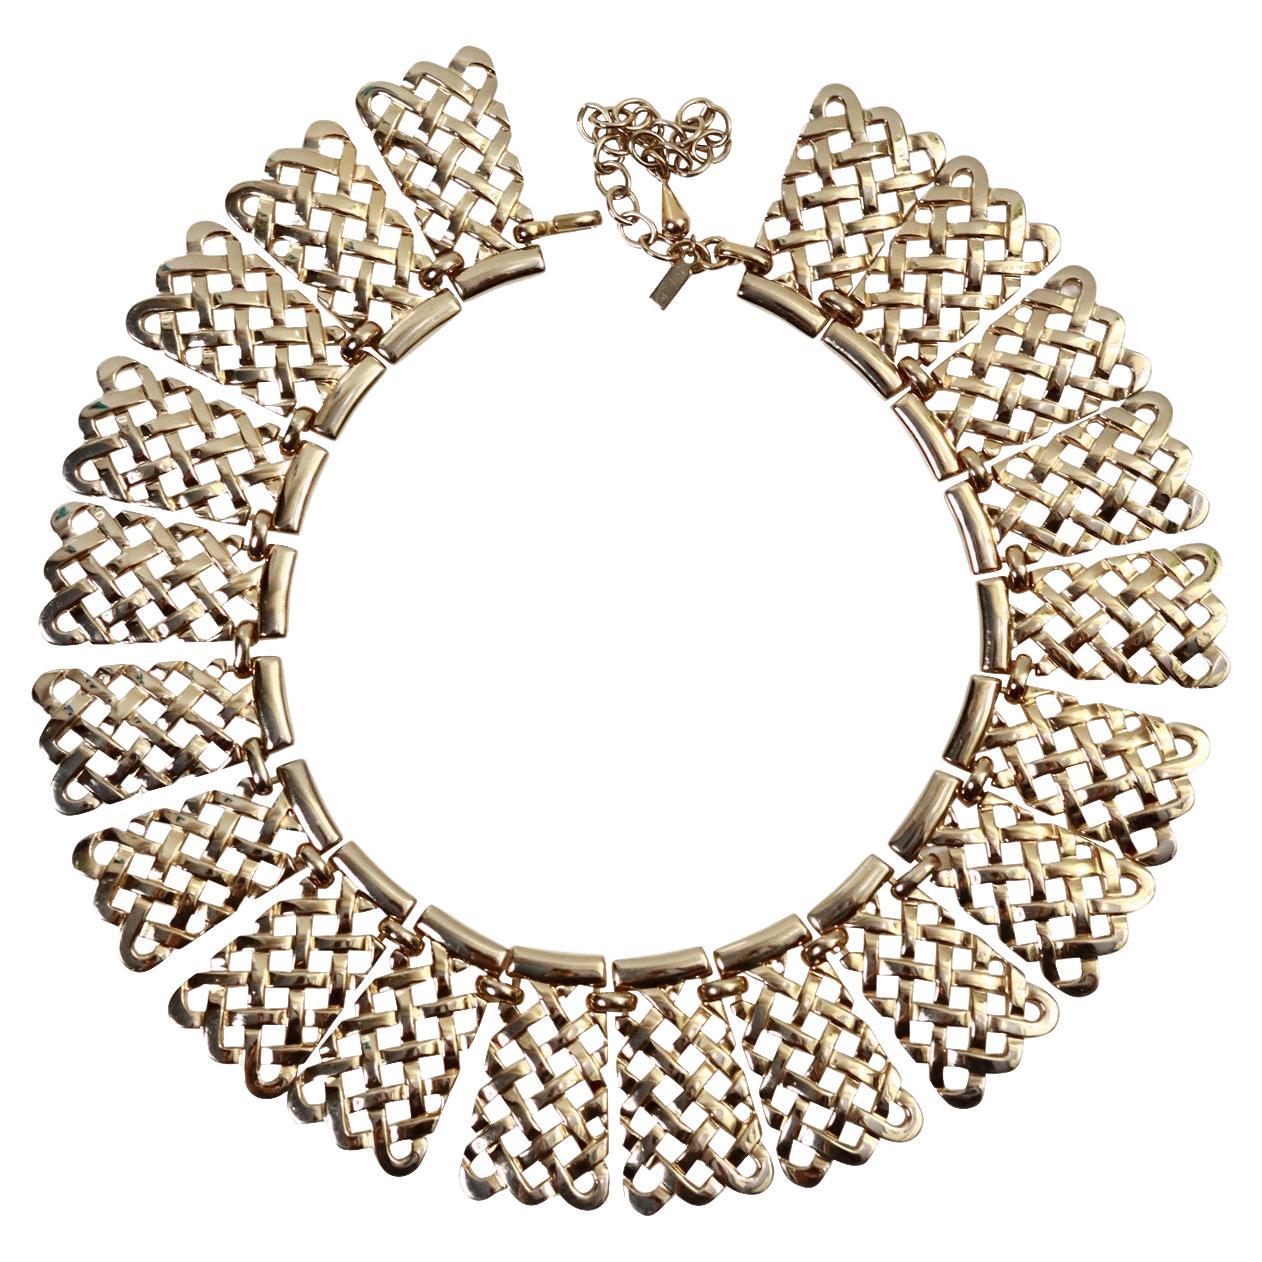 Vintage Monet Lattice Collar Necklace Circa 1980s. This gold necklace looks great with anything. Has a great look on a t-shirt or a white blouse or dressed up. Monet made the jewelry  for YSL in the 1980s and you can see some of the designs carry